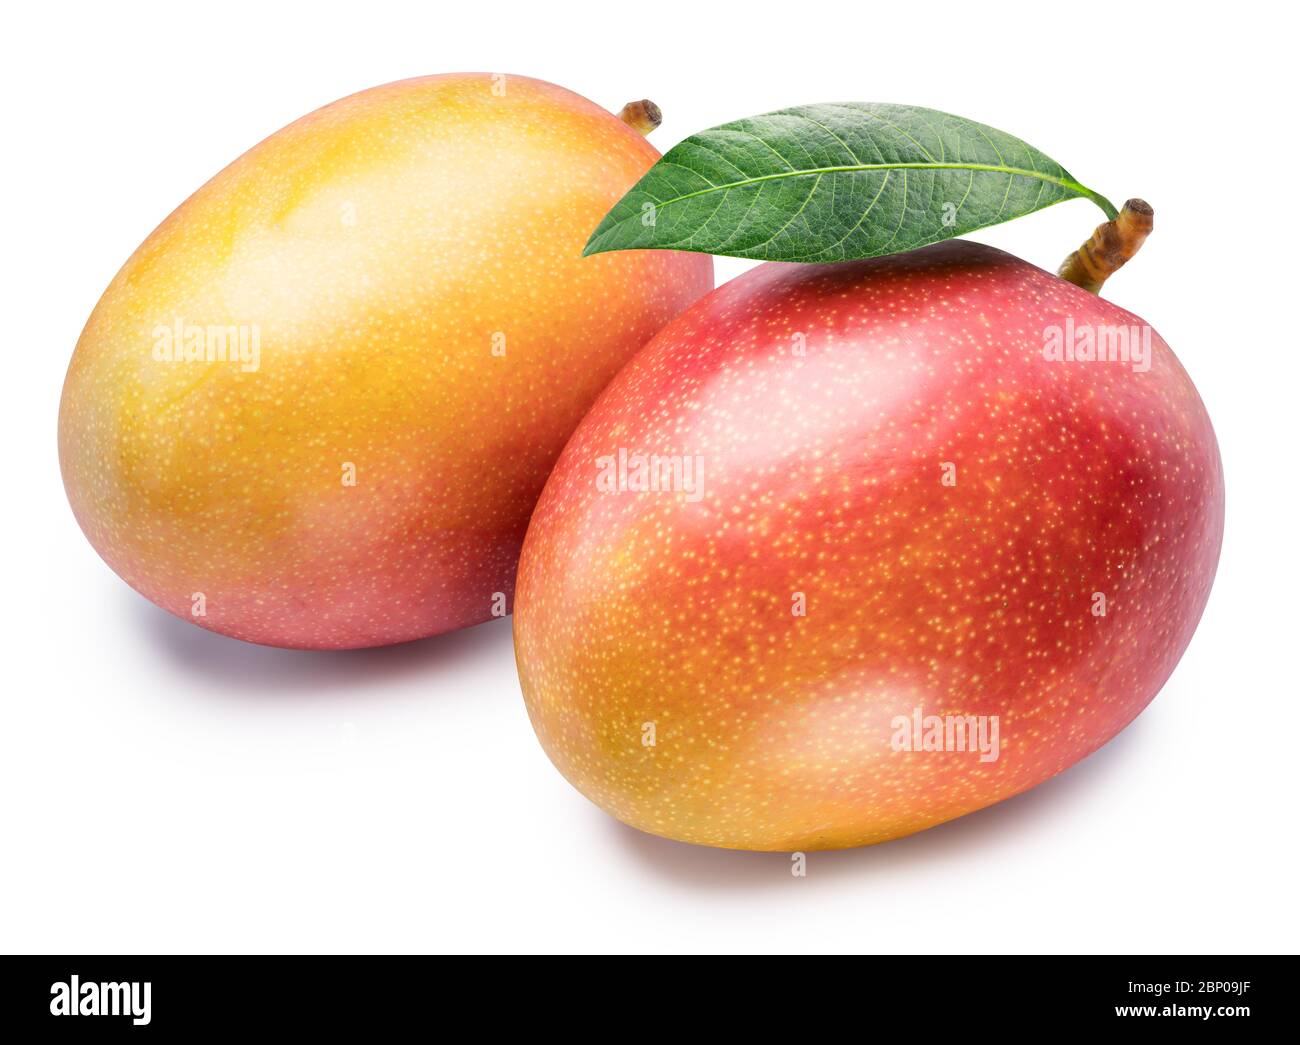 Mango fruits with mango leaf. Isolated on a white background. File contains clipping path. Stock Photo